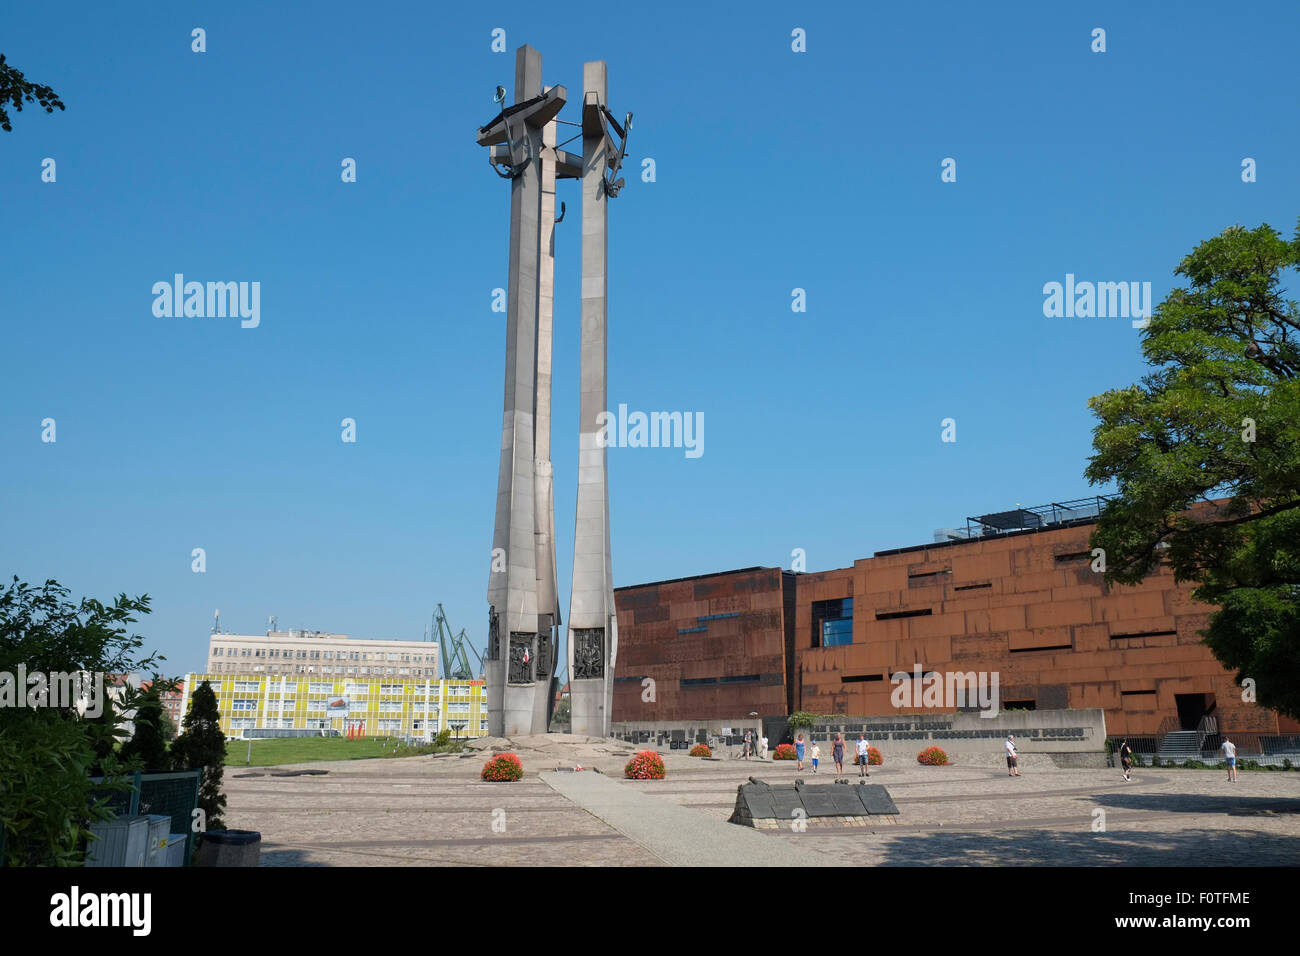 The Monument to the Fallen Shipyard Workers 1970, Solidarity Square, Gdansk, Poland. Stock Photo